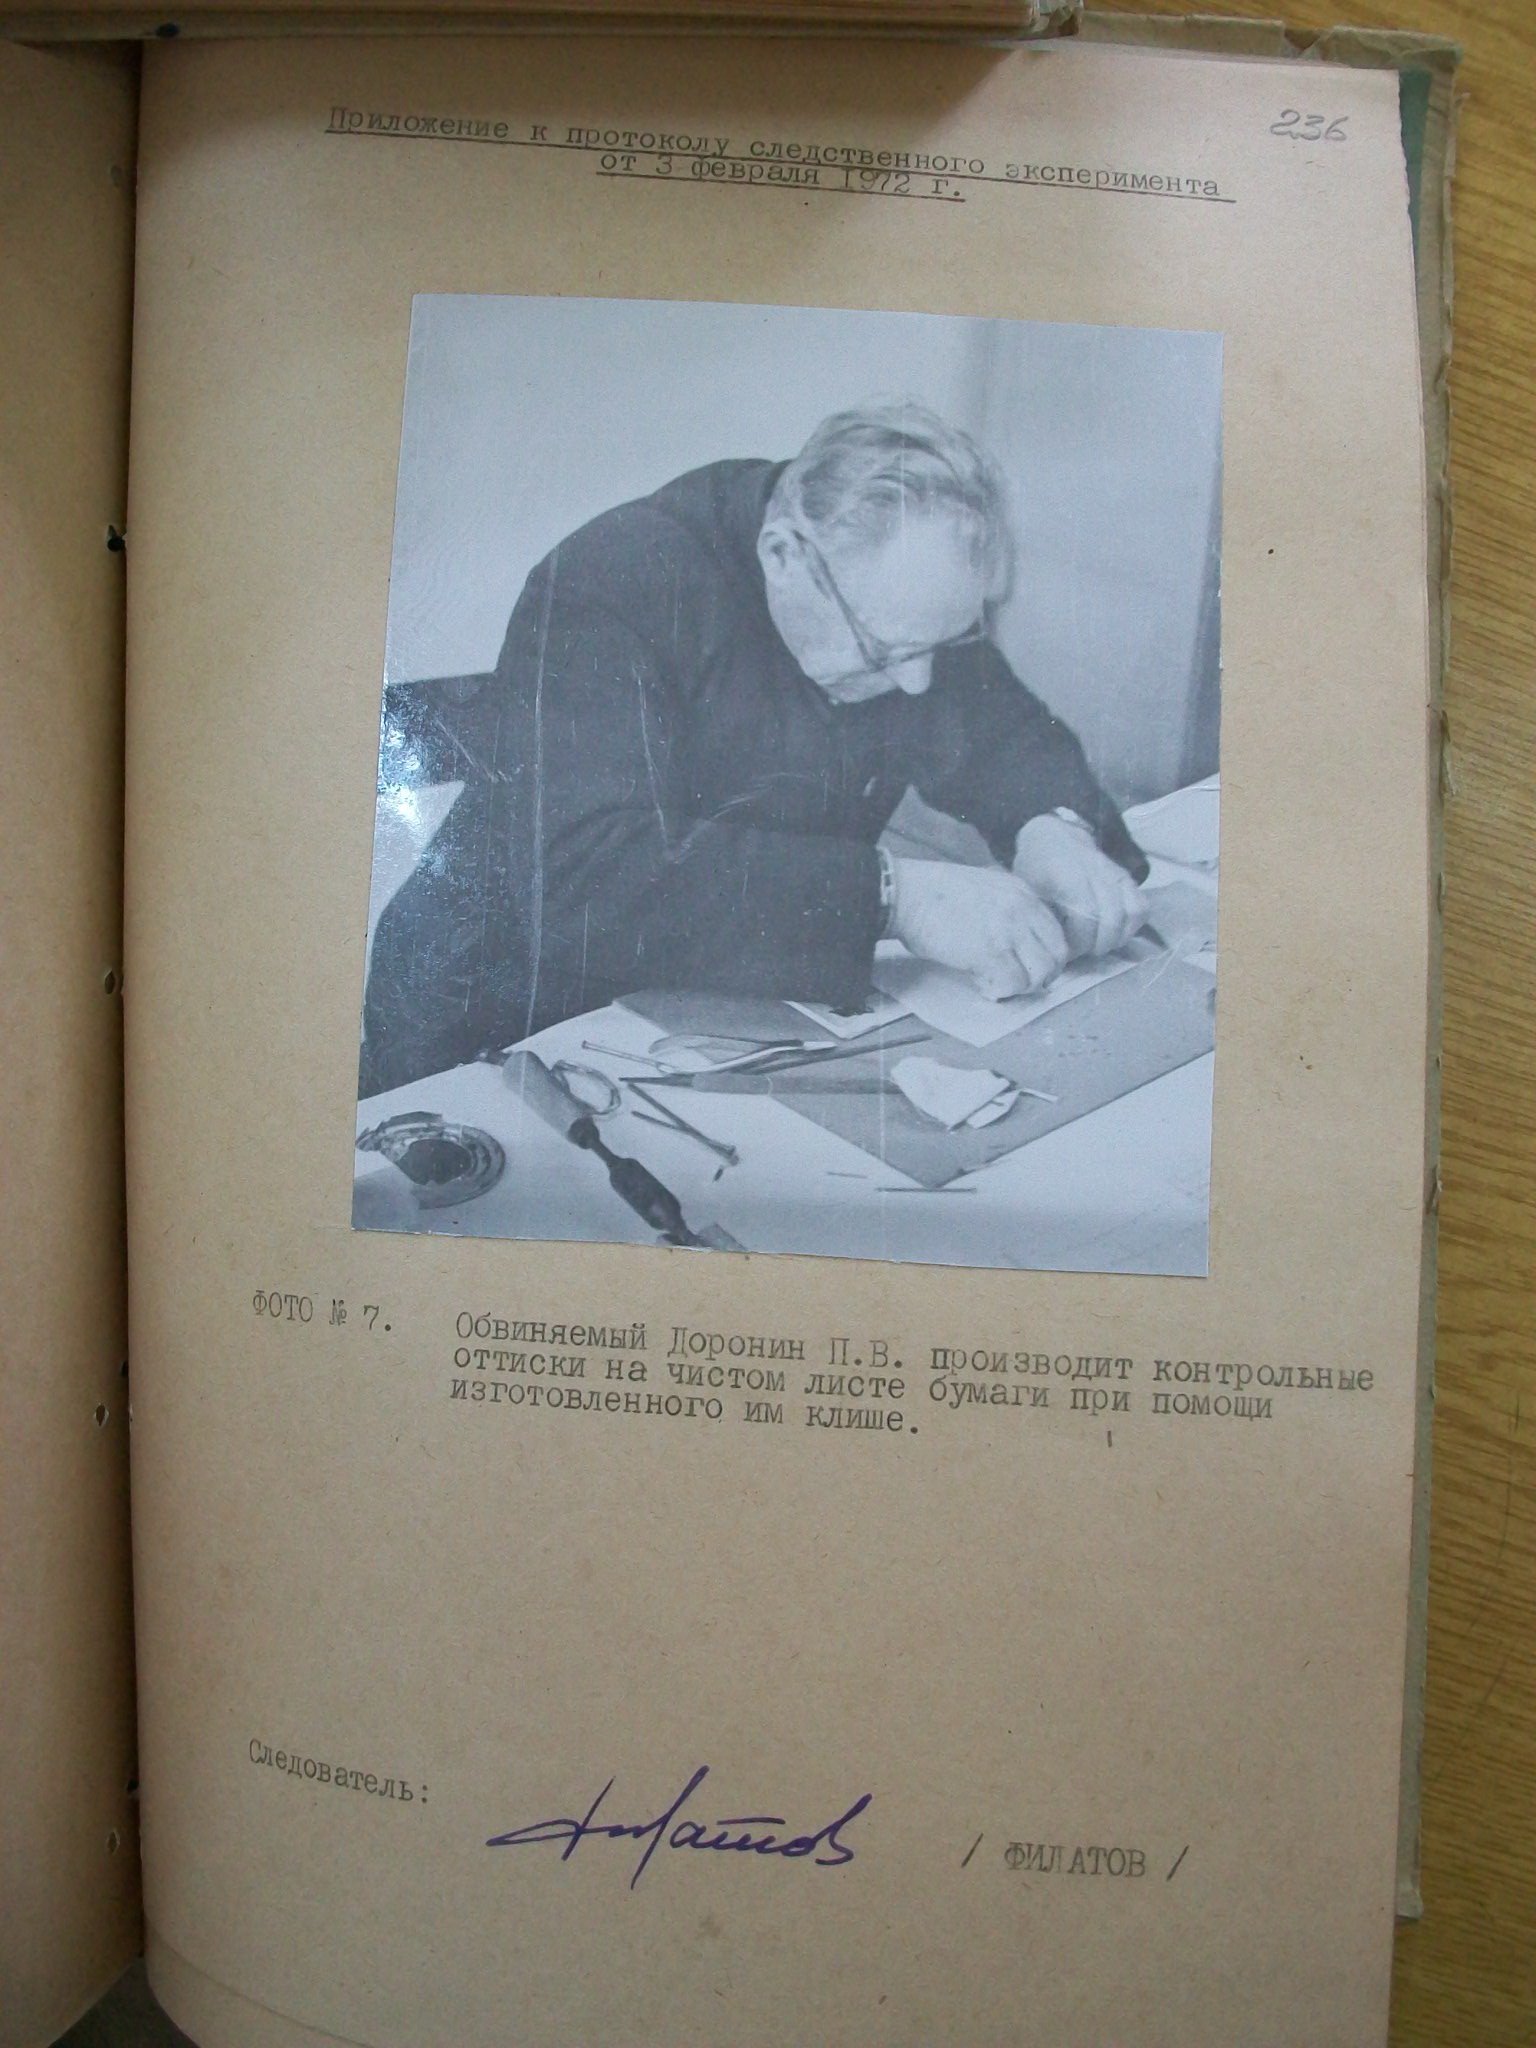 Photo of Pavel Doronin during the preliminary inquiry. January 1972